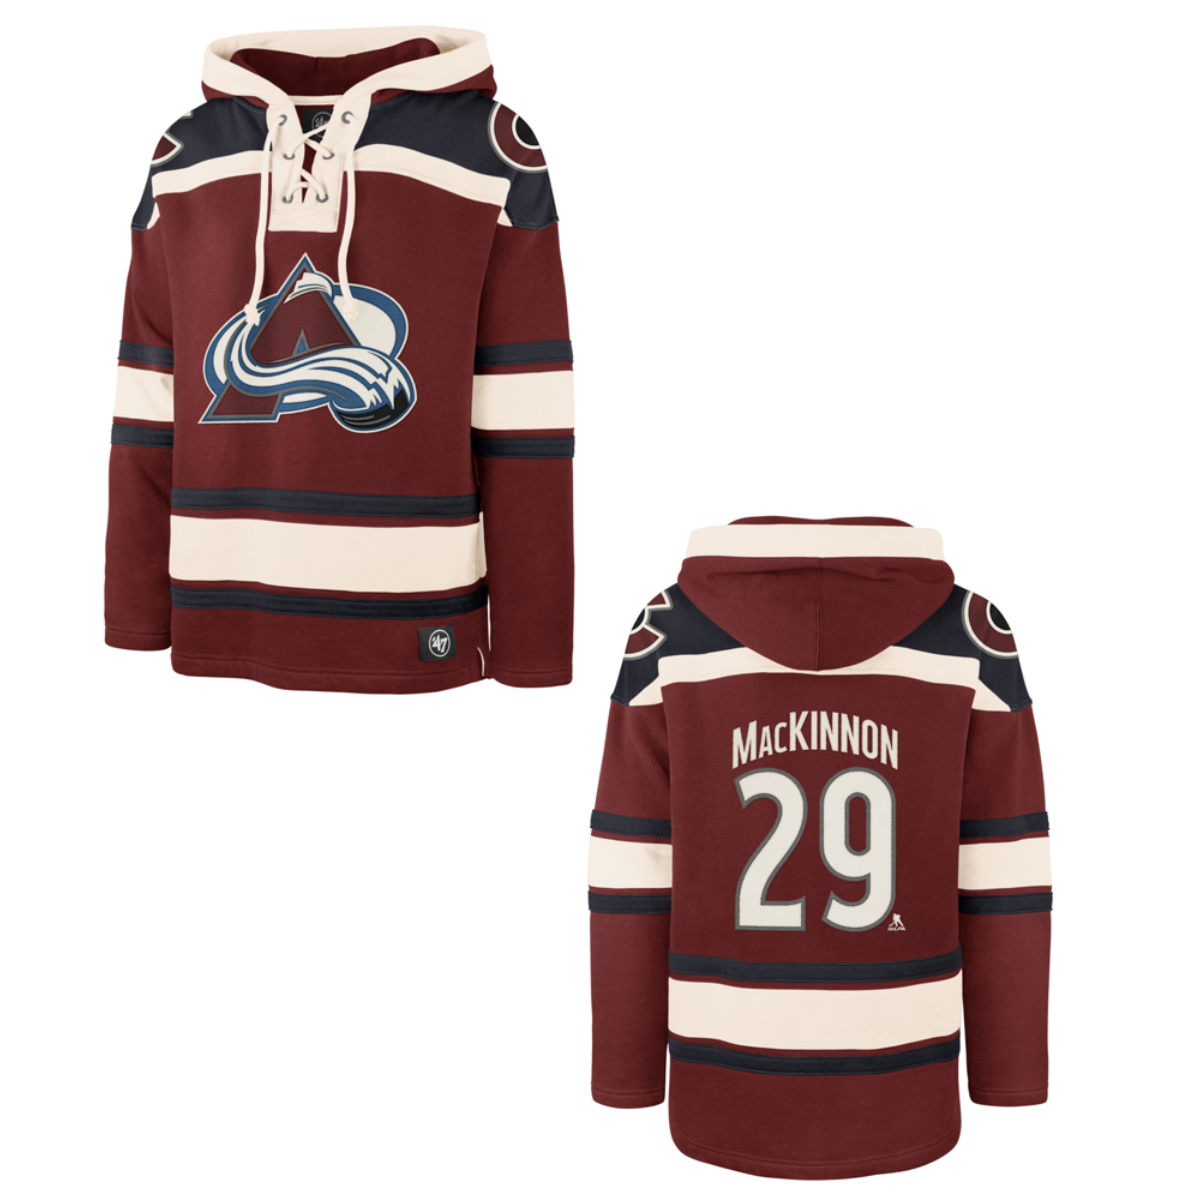 Avalanche Lacer Home Player Hoody